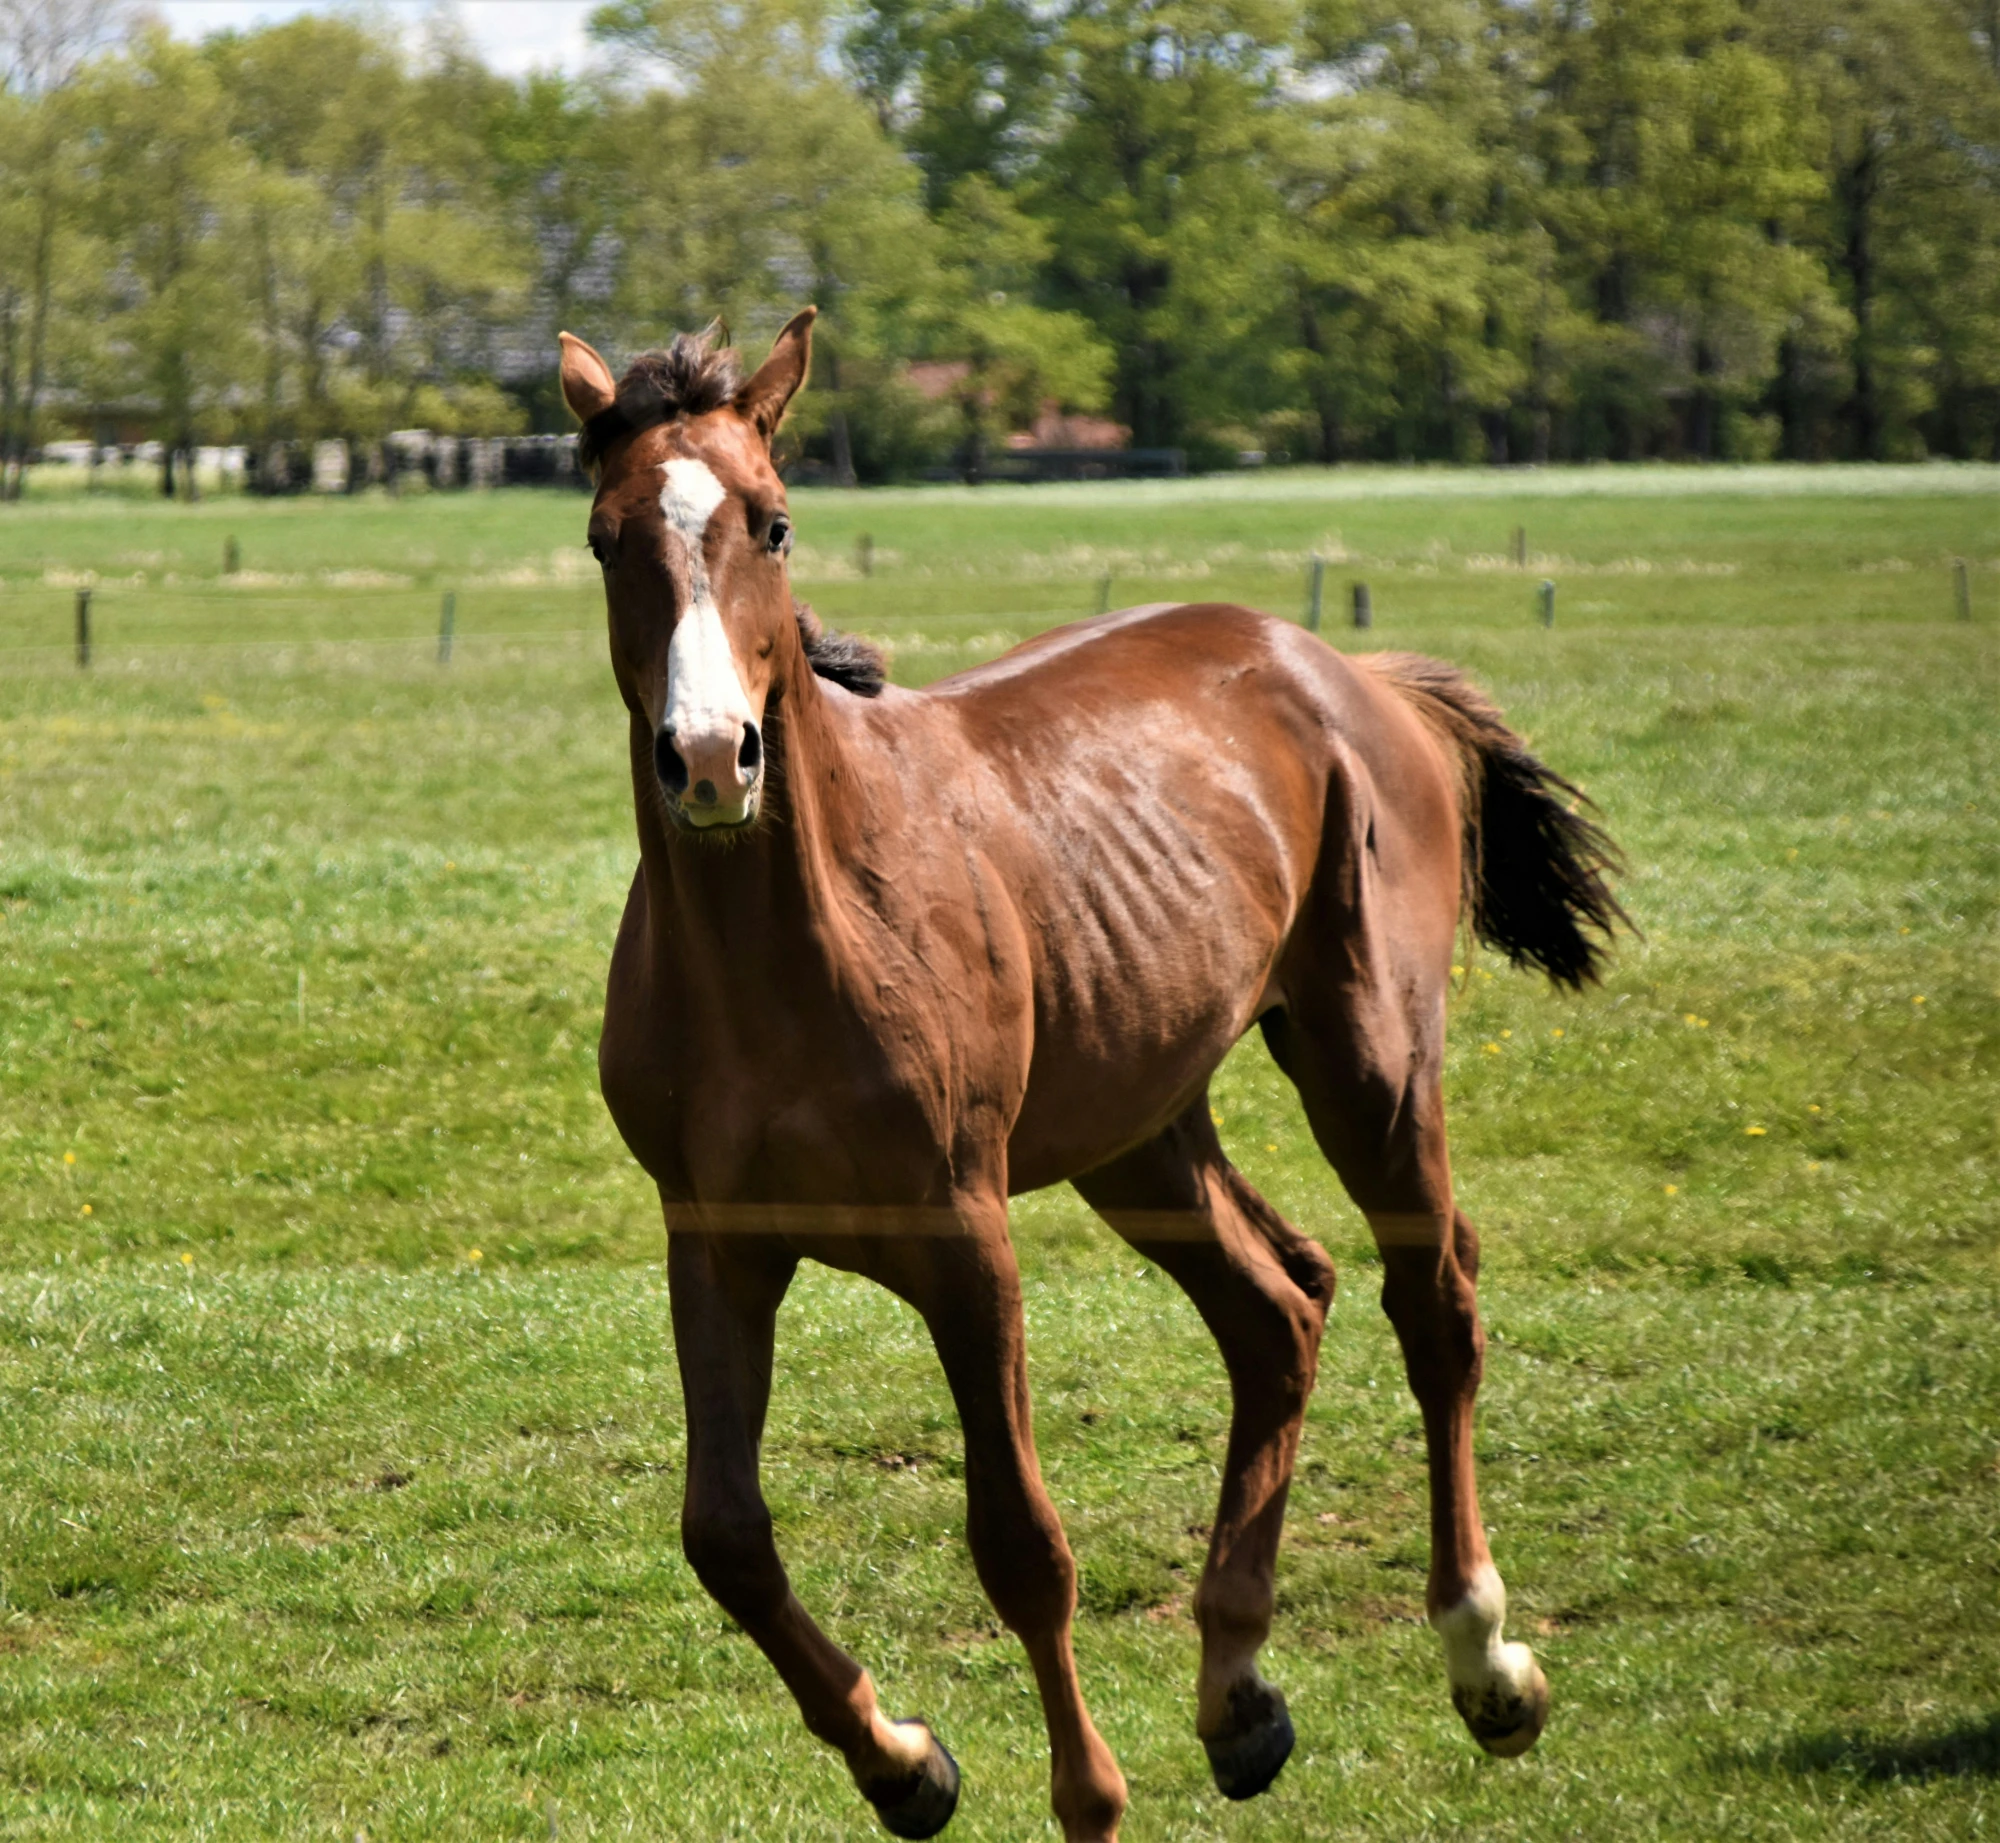 a horse running in the grass near a fence